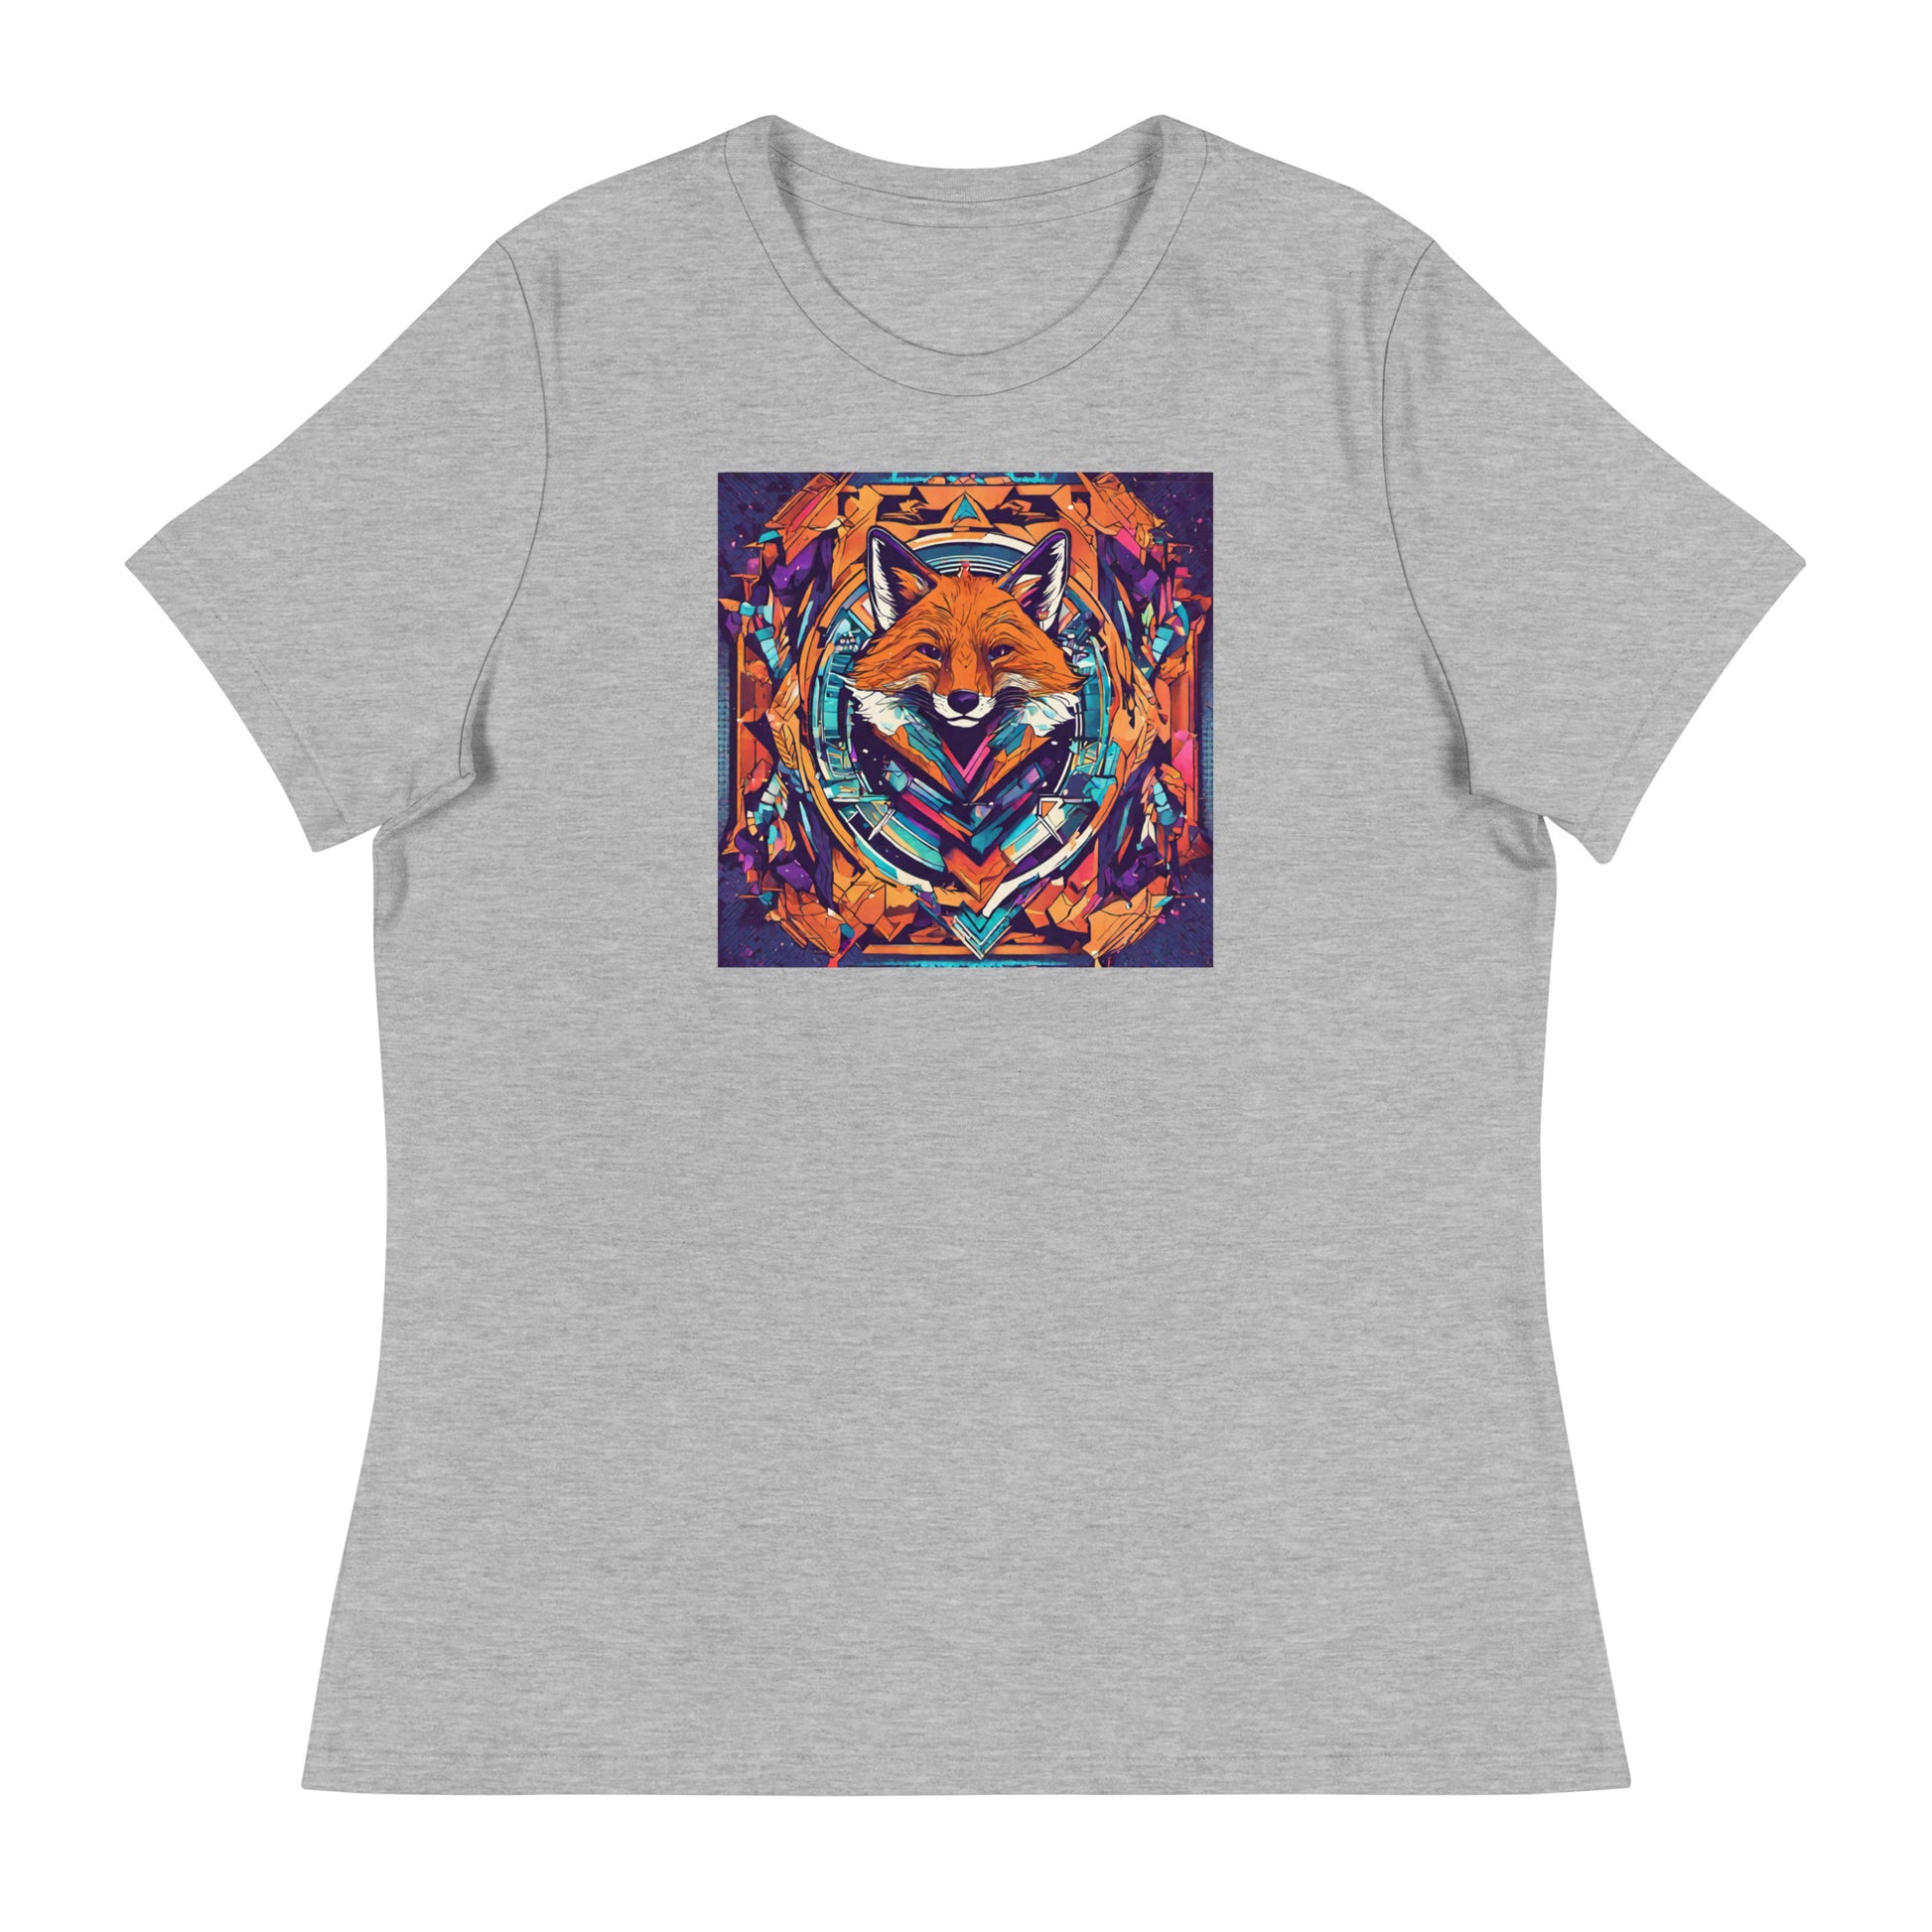 Colorful Fox Women's T-Shirt Athletic Heather